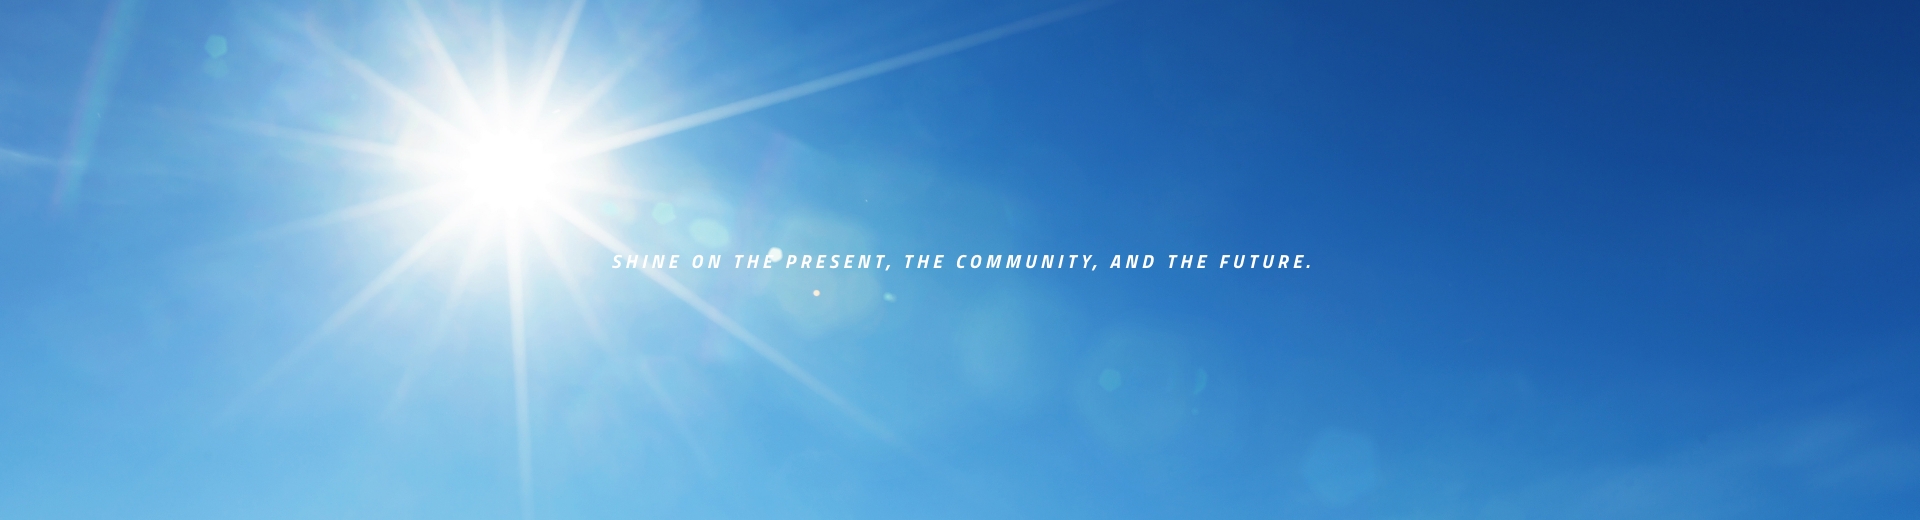 Shine on the Present, the Community, and the Future.